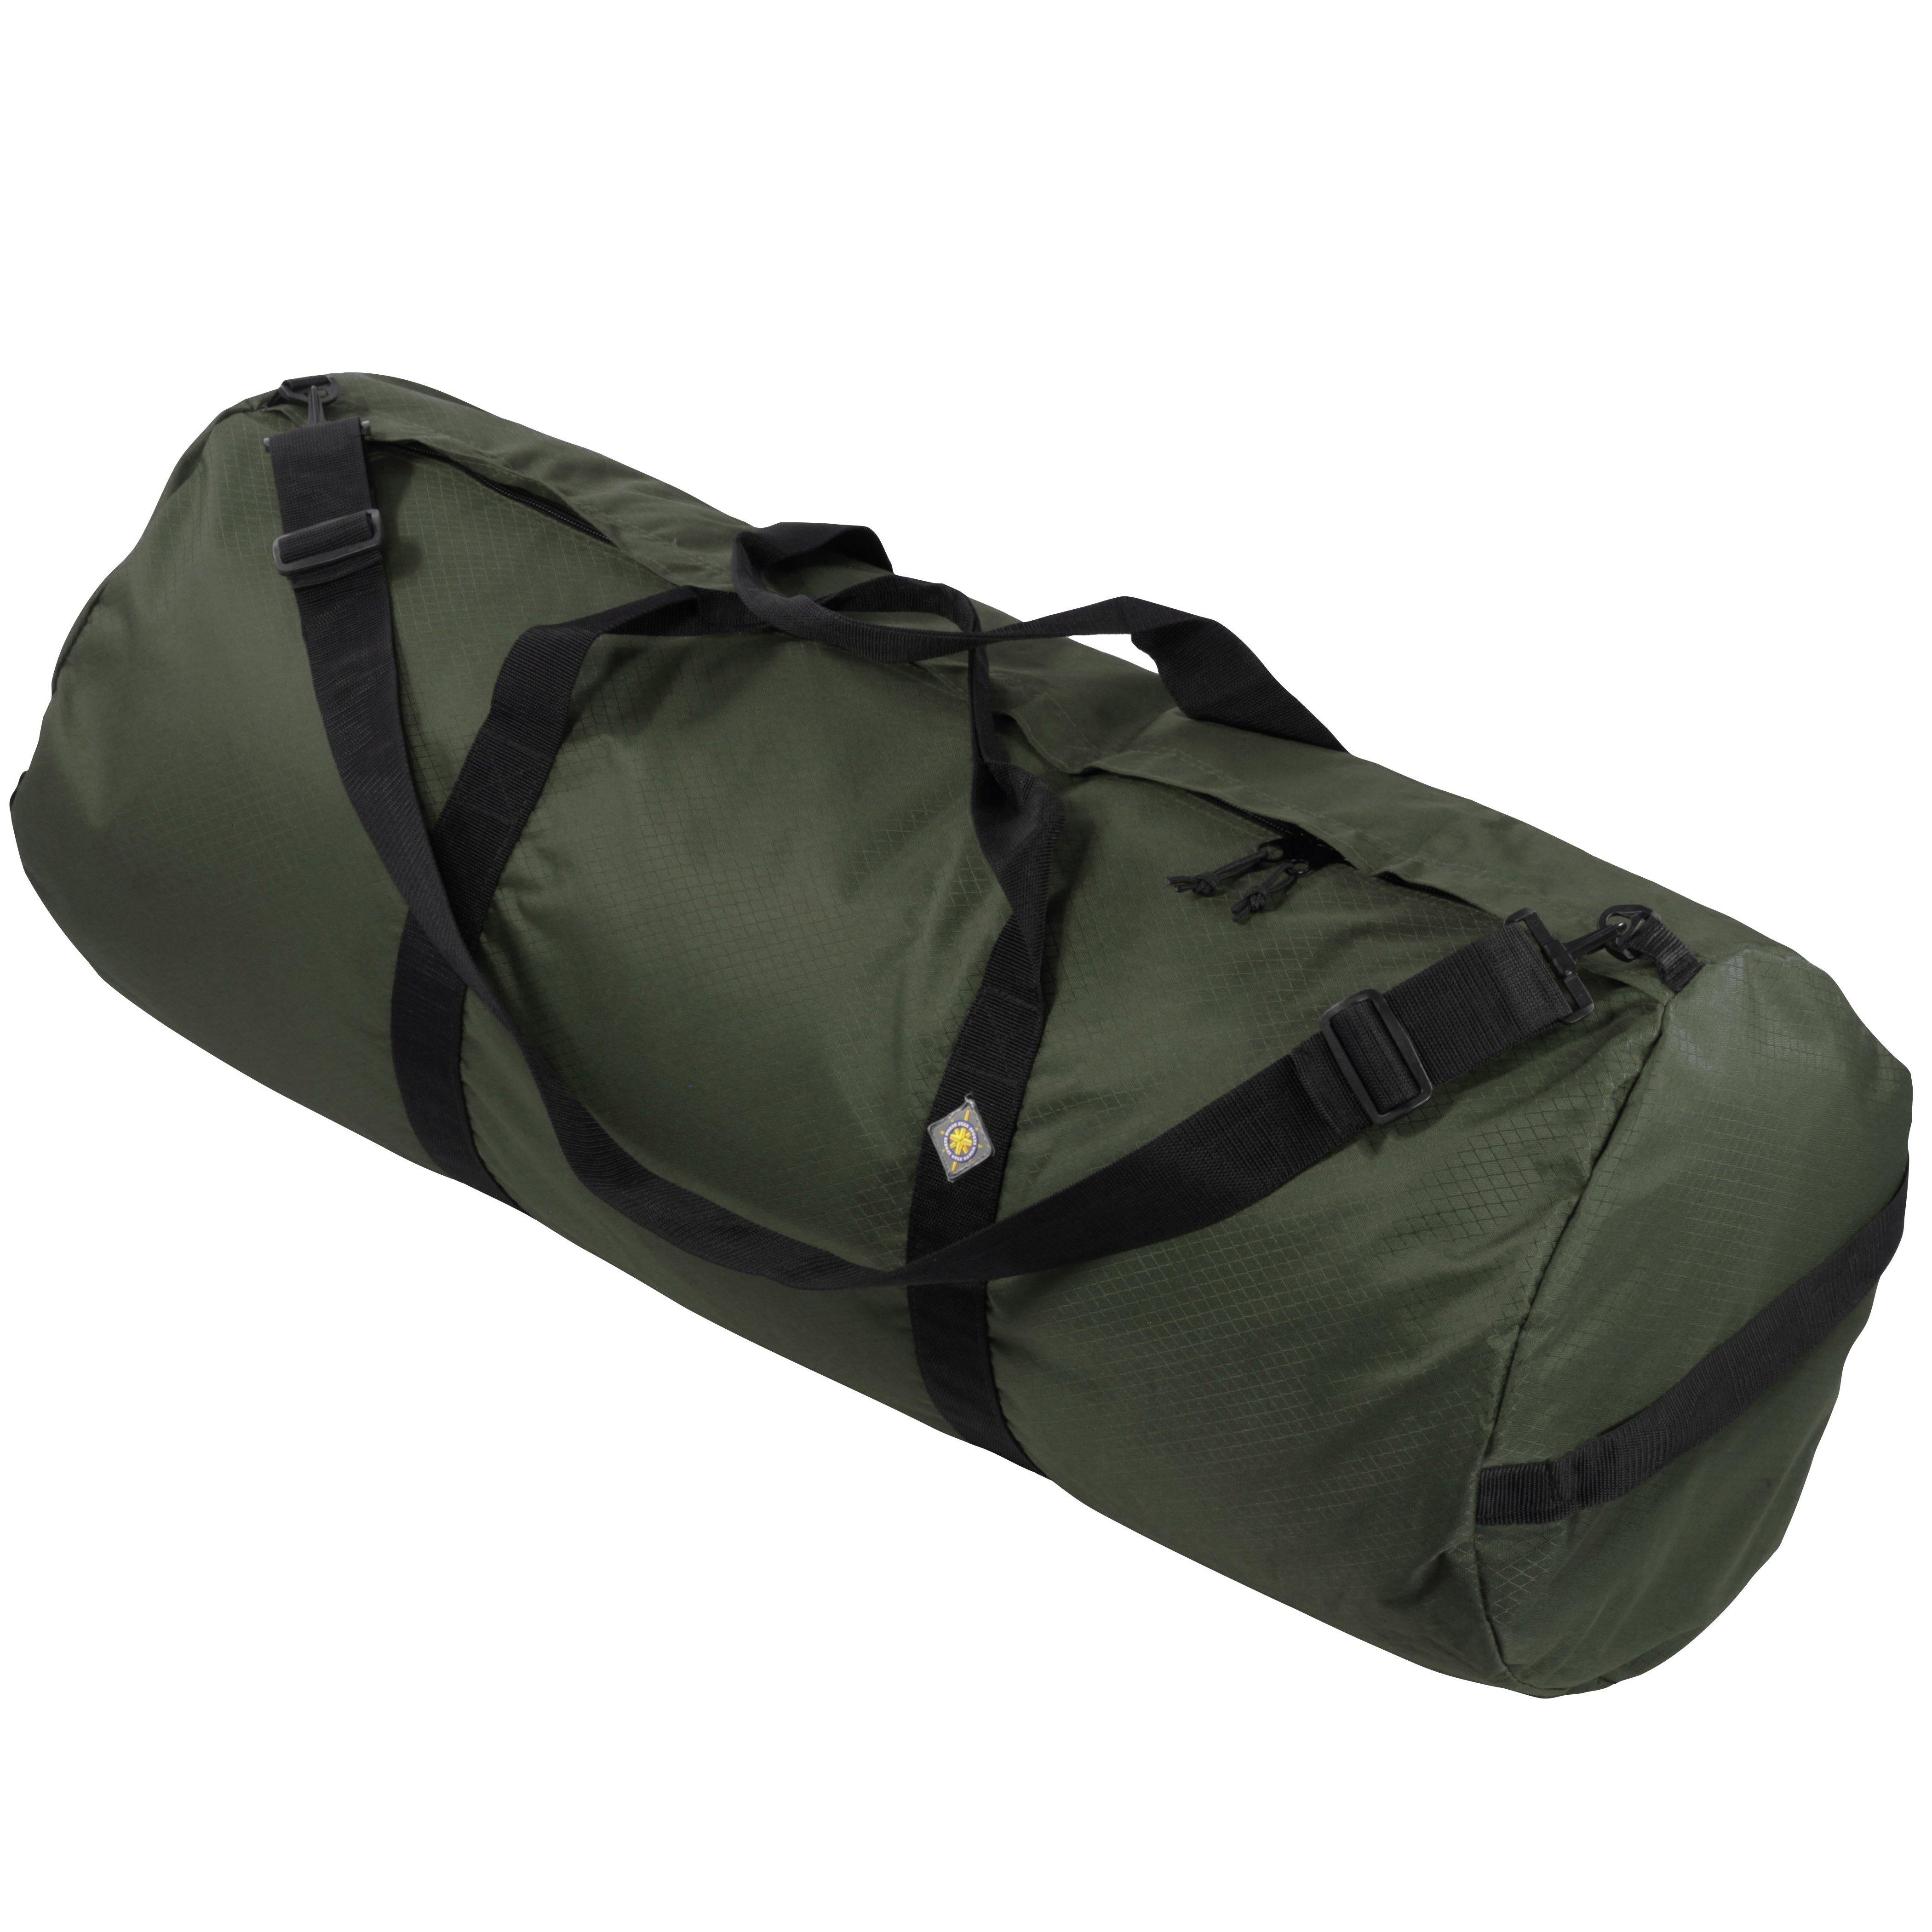 Studio photo the Forestry Green SD1640DLX Standard Duffle by Northstar Bags. 131 liter duffel with diamond ripstop fabric, thick webbing straps, and a large format metal zipper. Guaranteed for life.